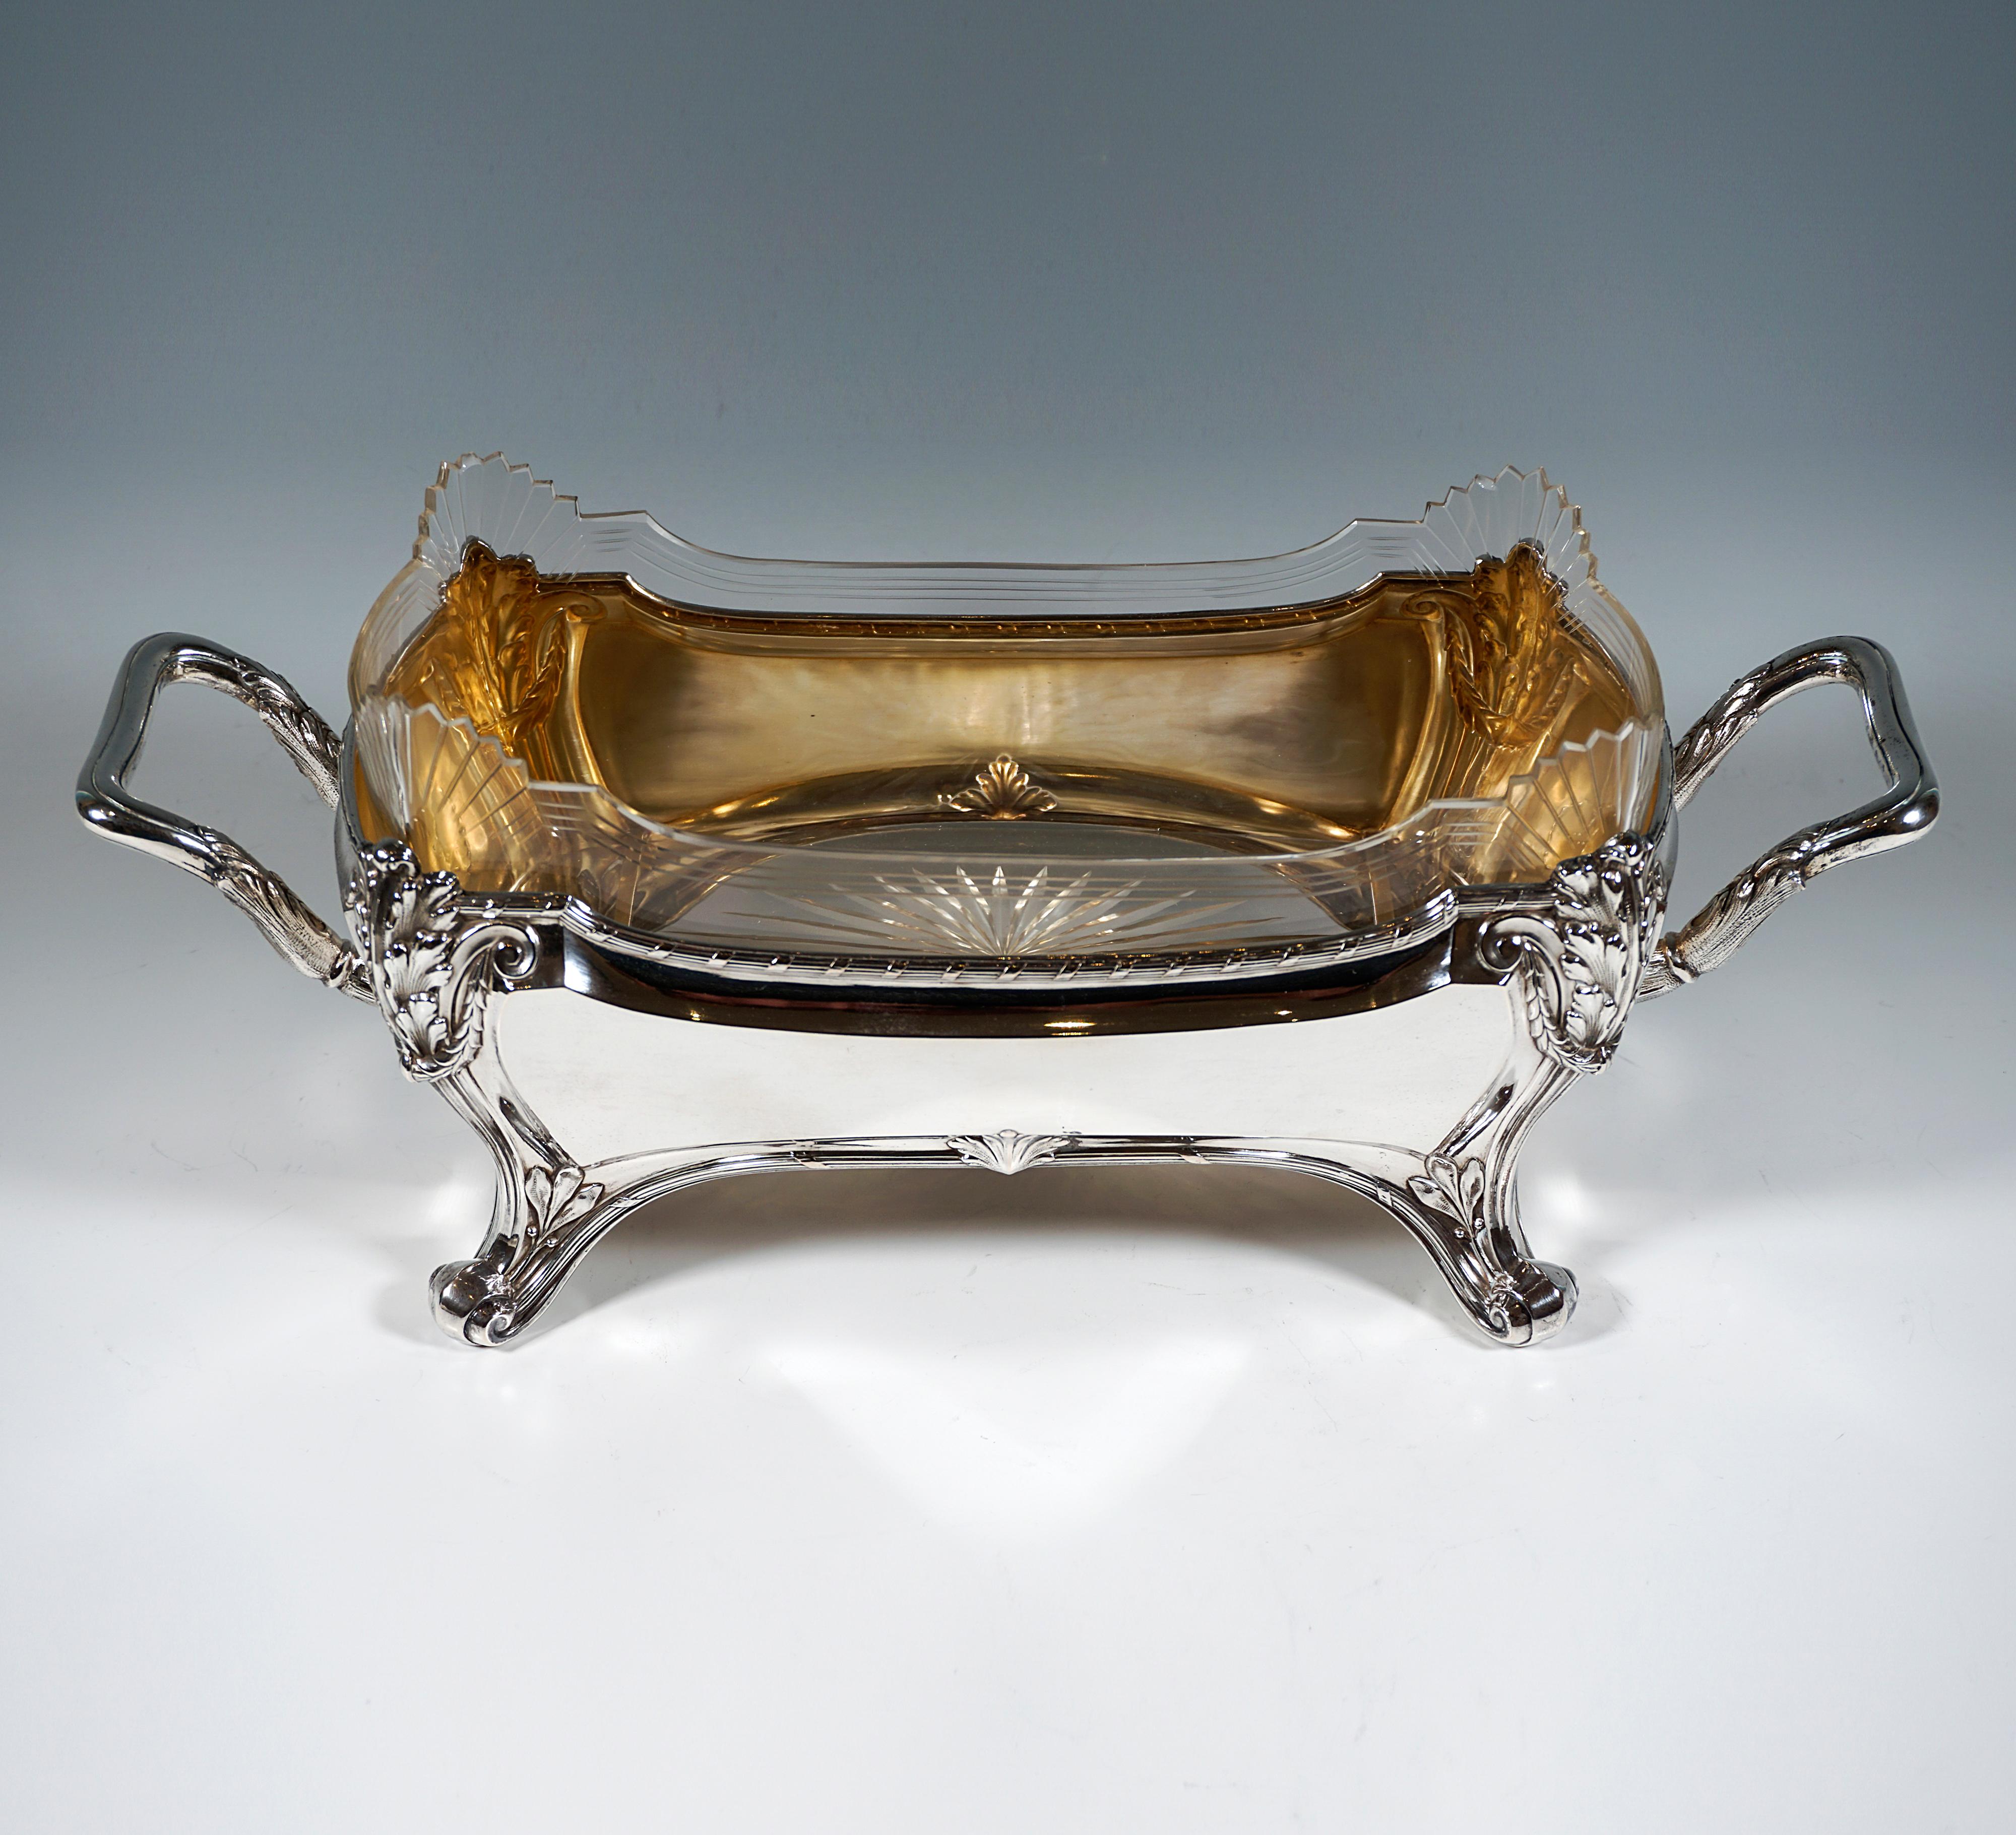 Elegant silver vessel in rectangular base form with slightly bulging side walls widening upwards, corner decorations with volutes and acanthus motifs in fluted pilasters tapering downwards to high volute feet, bundled decorative bands on top and